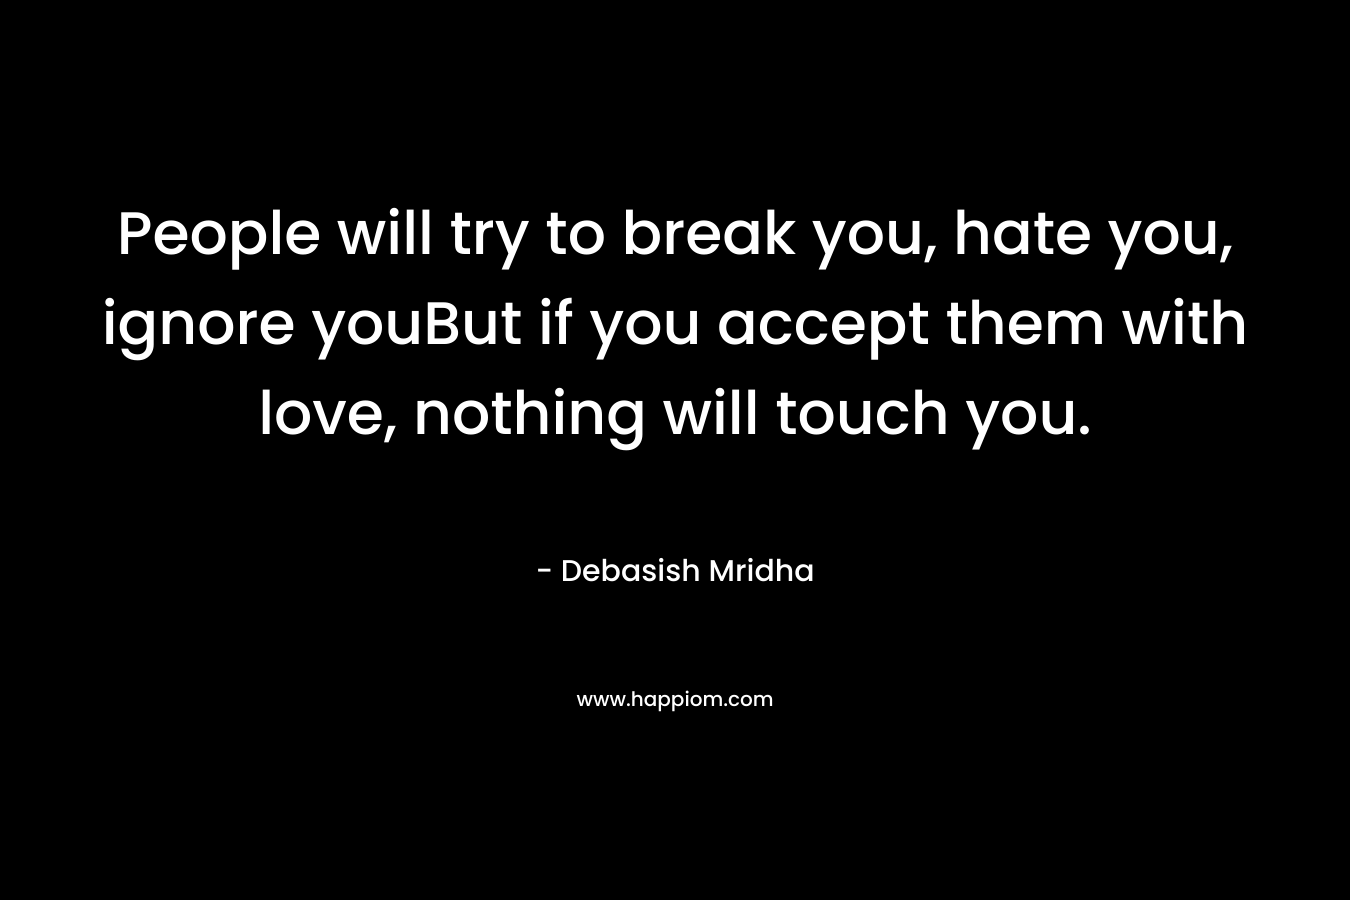 People will try to break you, hate you, ignore youBut if you accept them with love, nothing will touch you. – Debasish Mridha